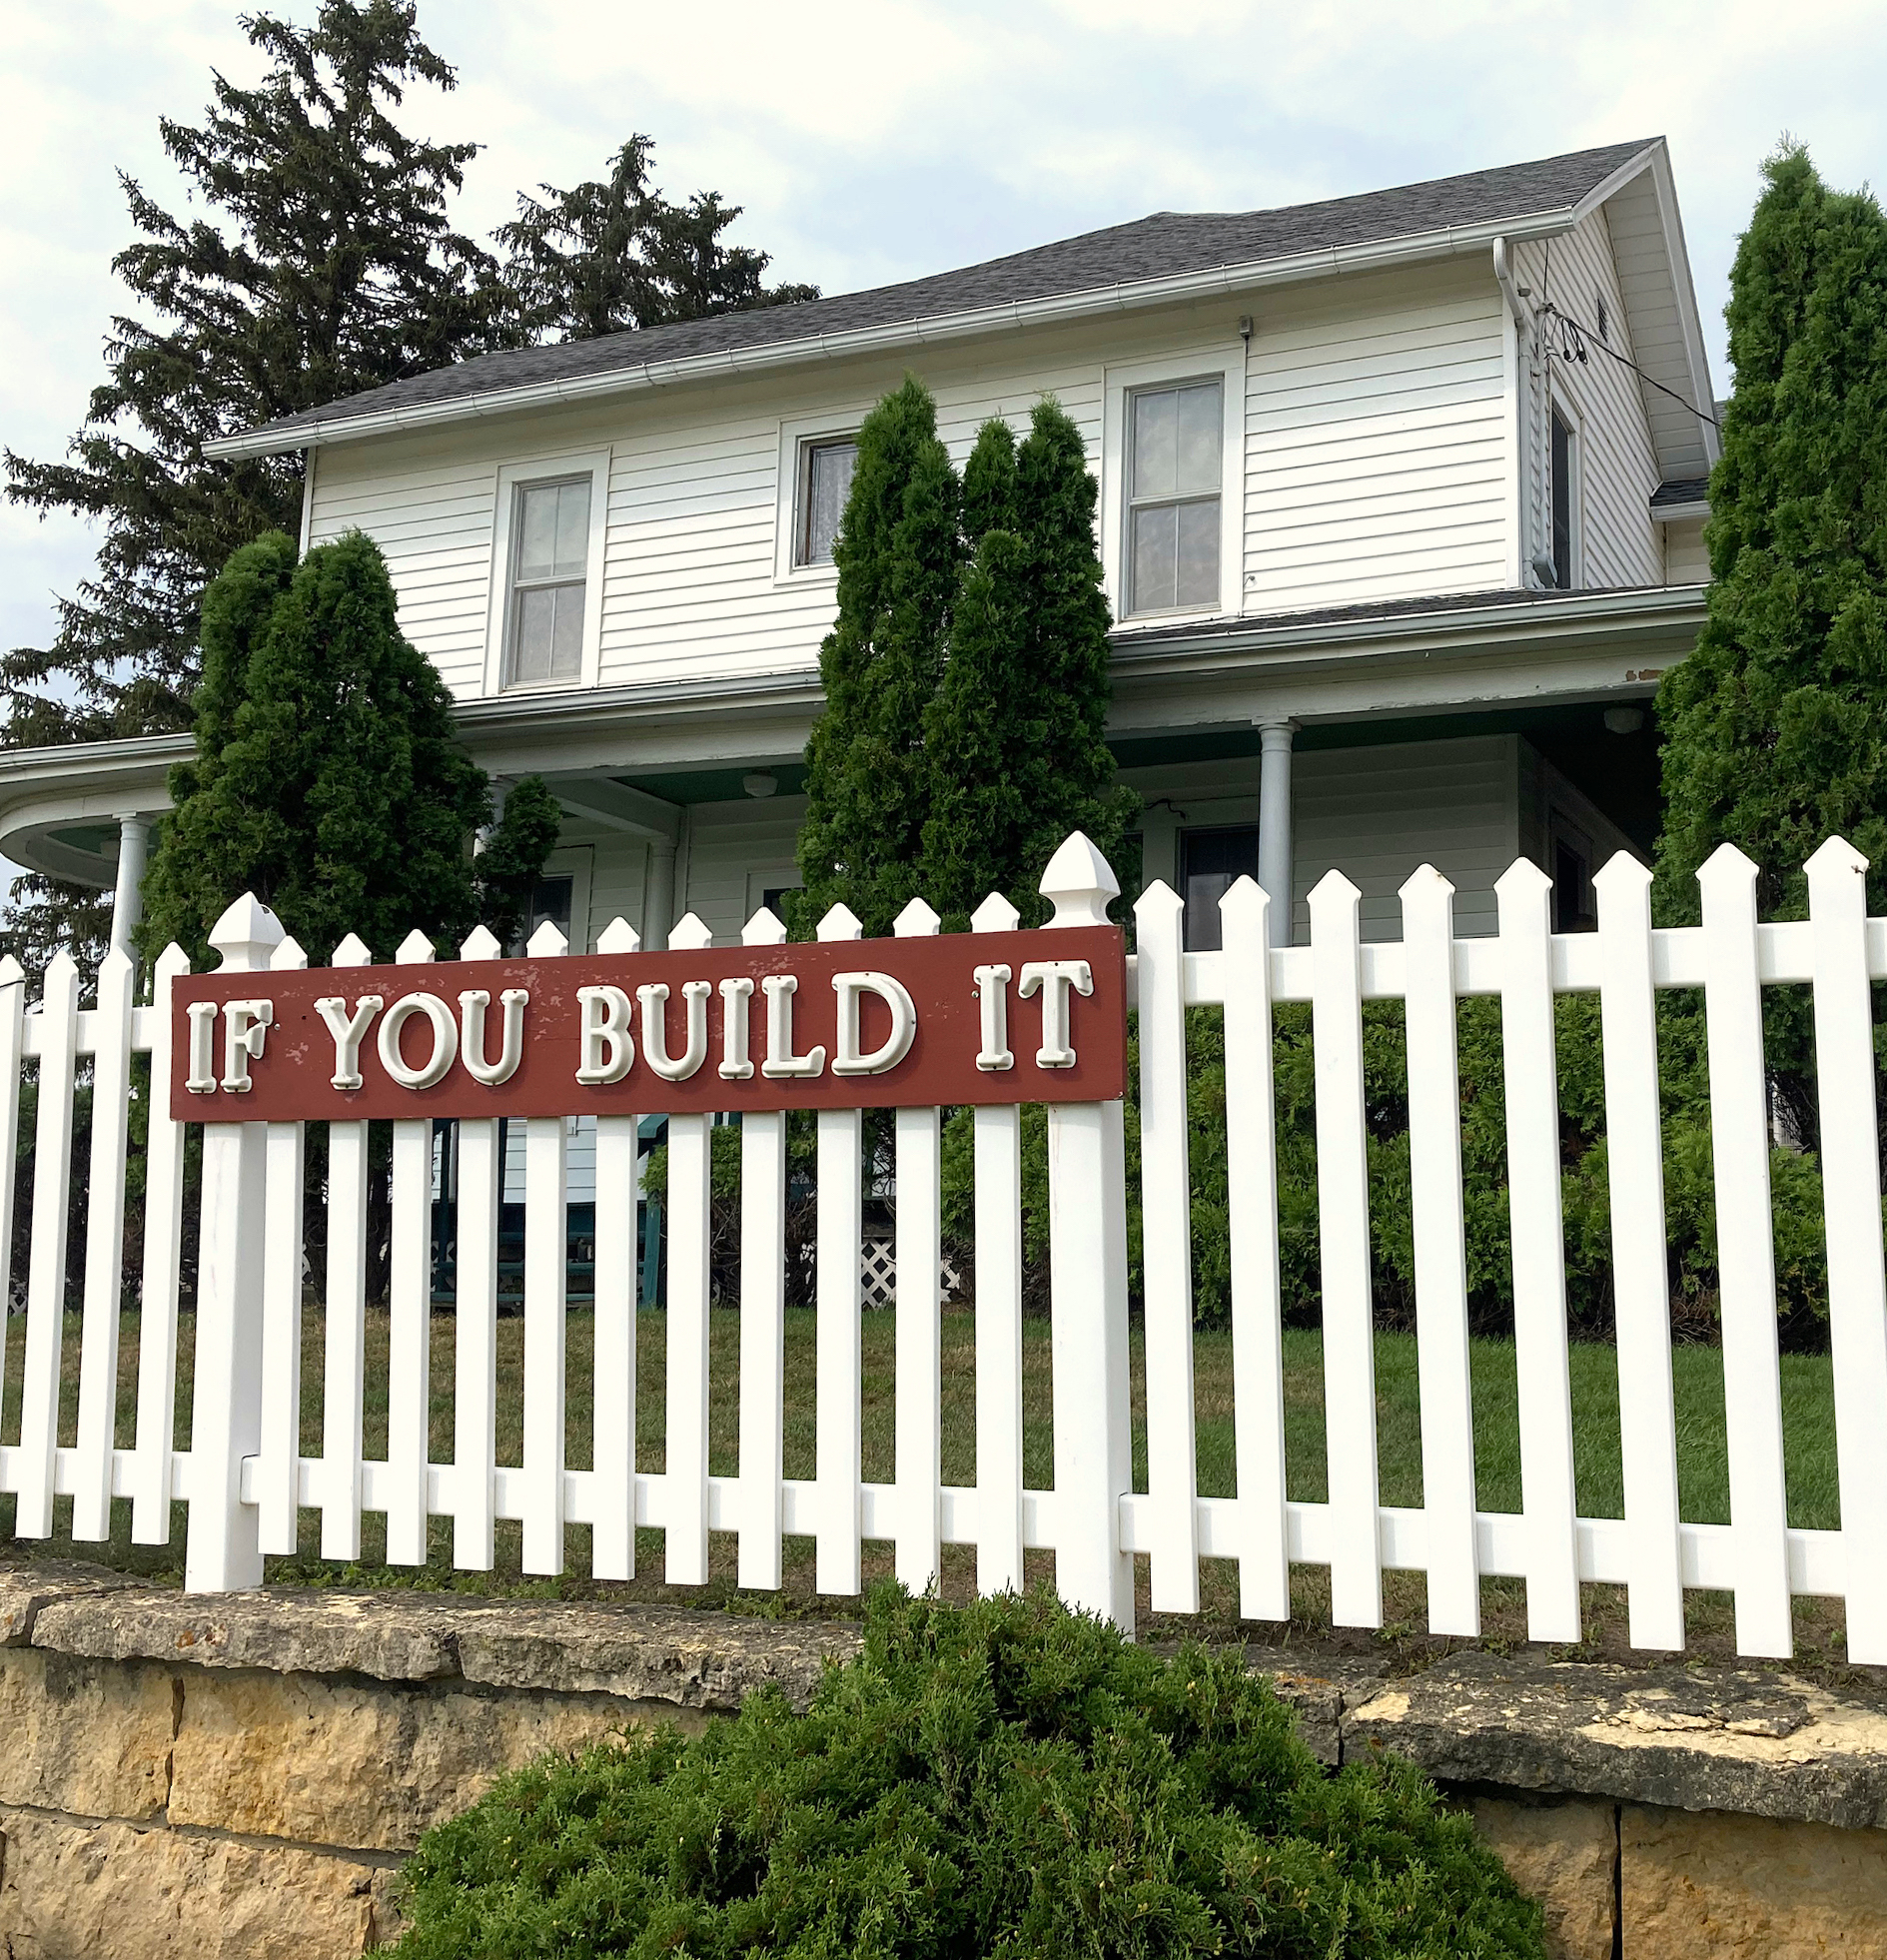 white picket fence with if you build it sign in red